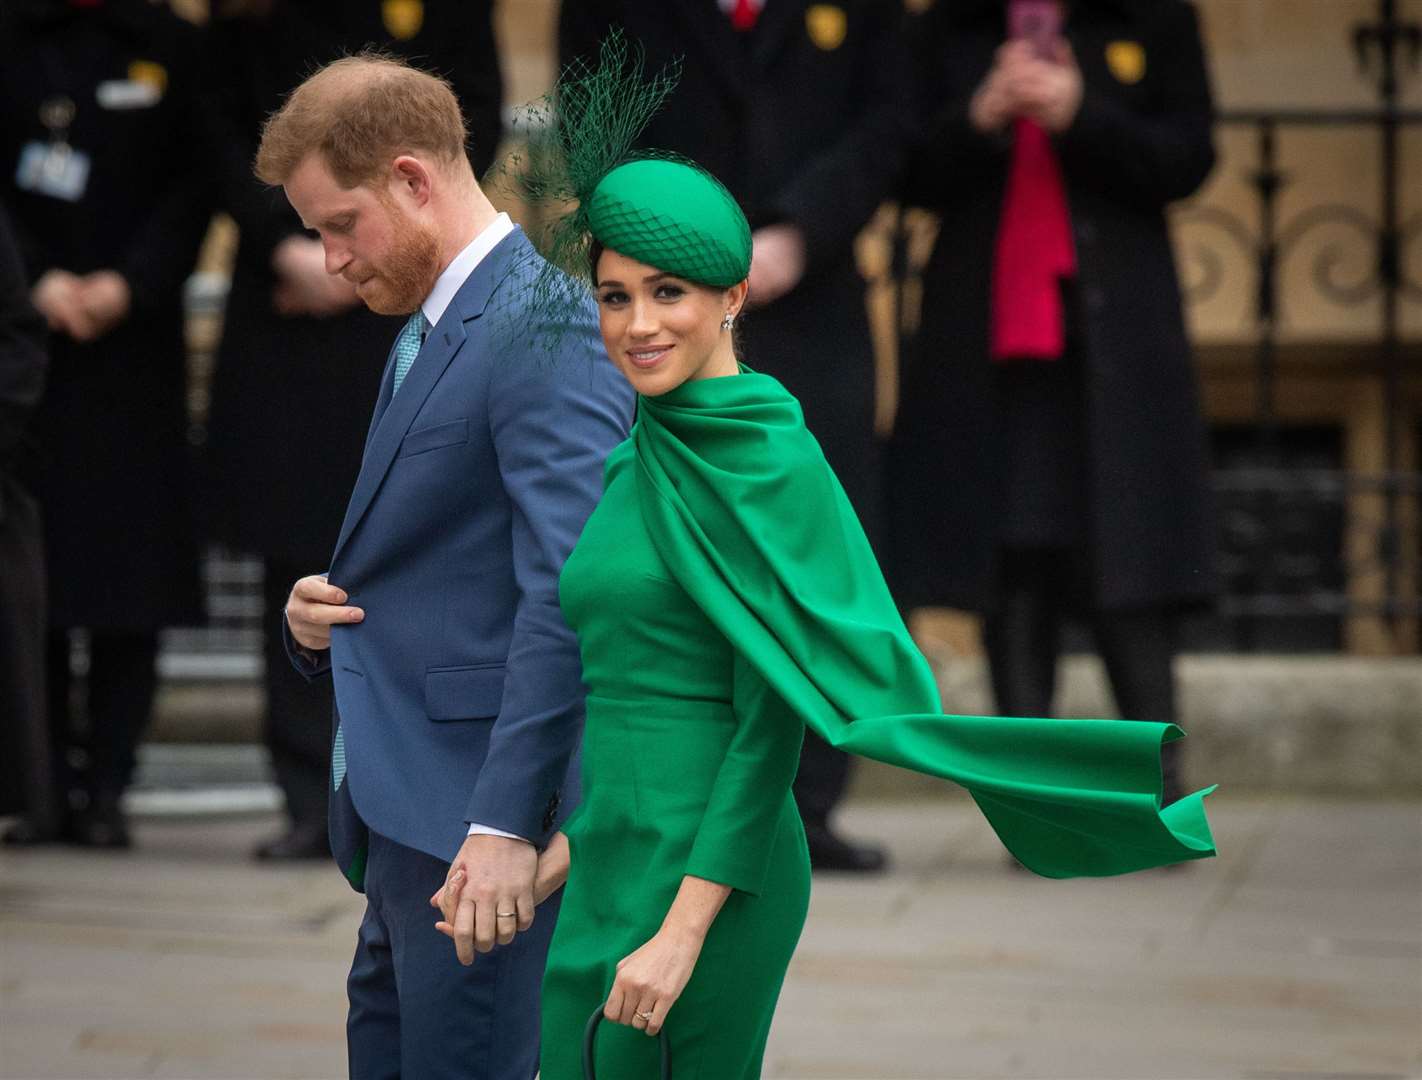 The Duke and Duchess of Sussex arrive at the Commonwealth Service at Westminster Abbey in March 2020 (Dominic Lipinski/PA)